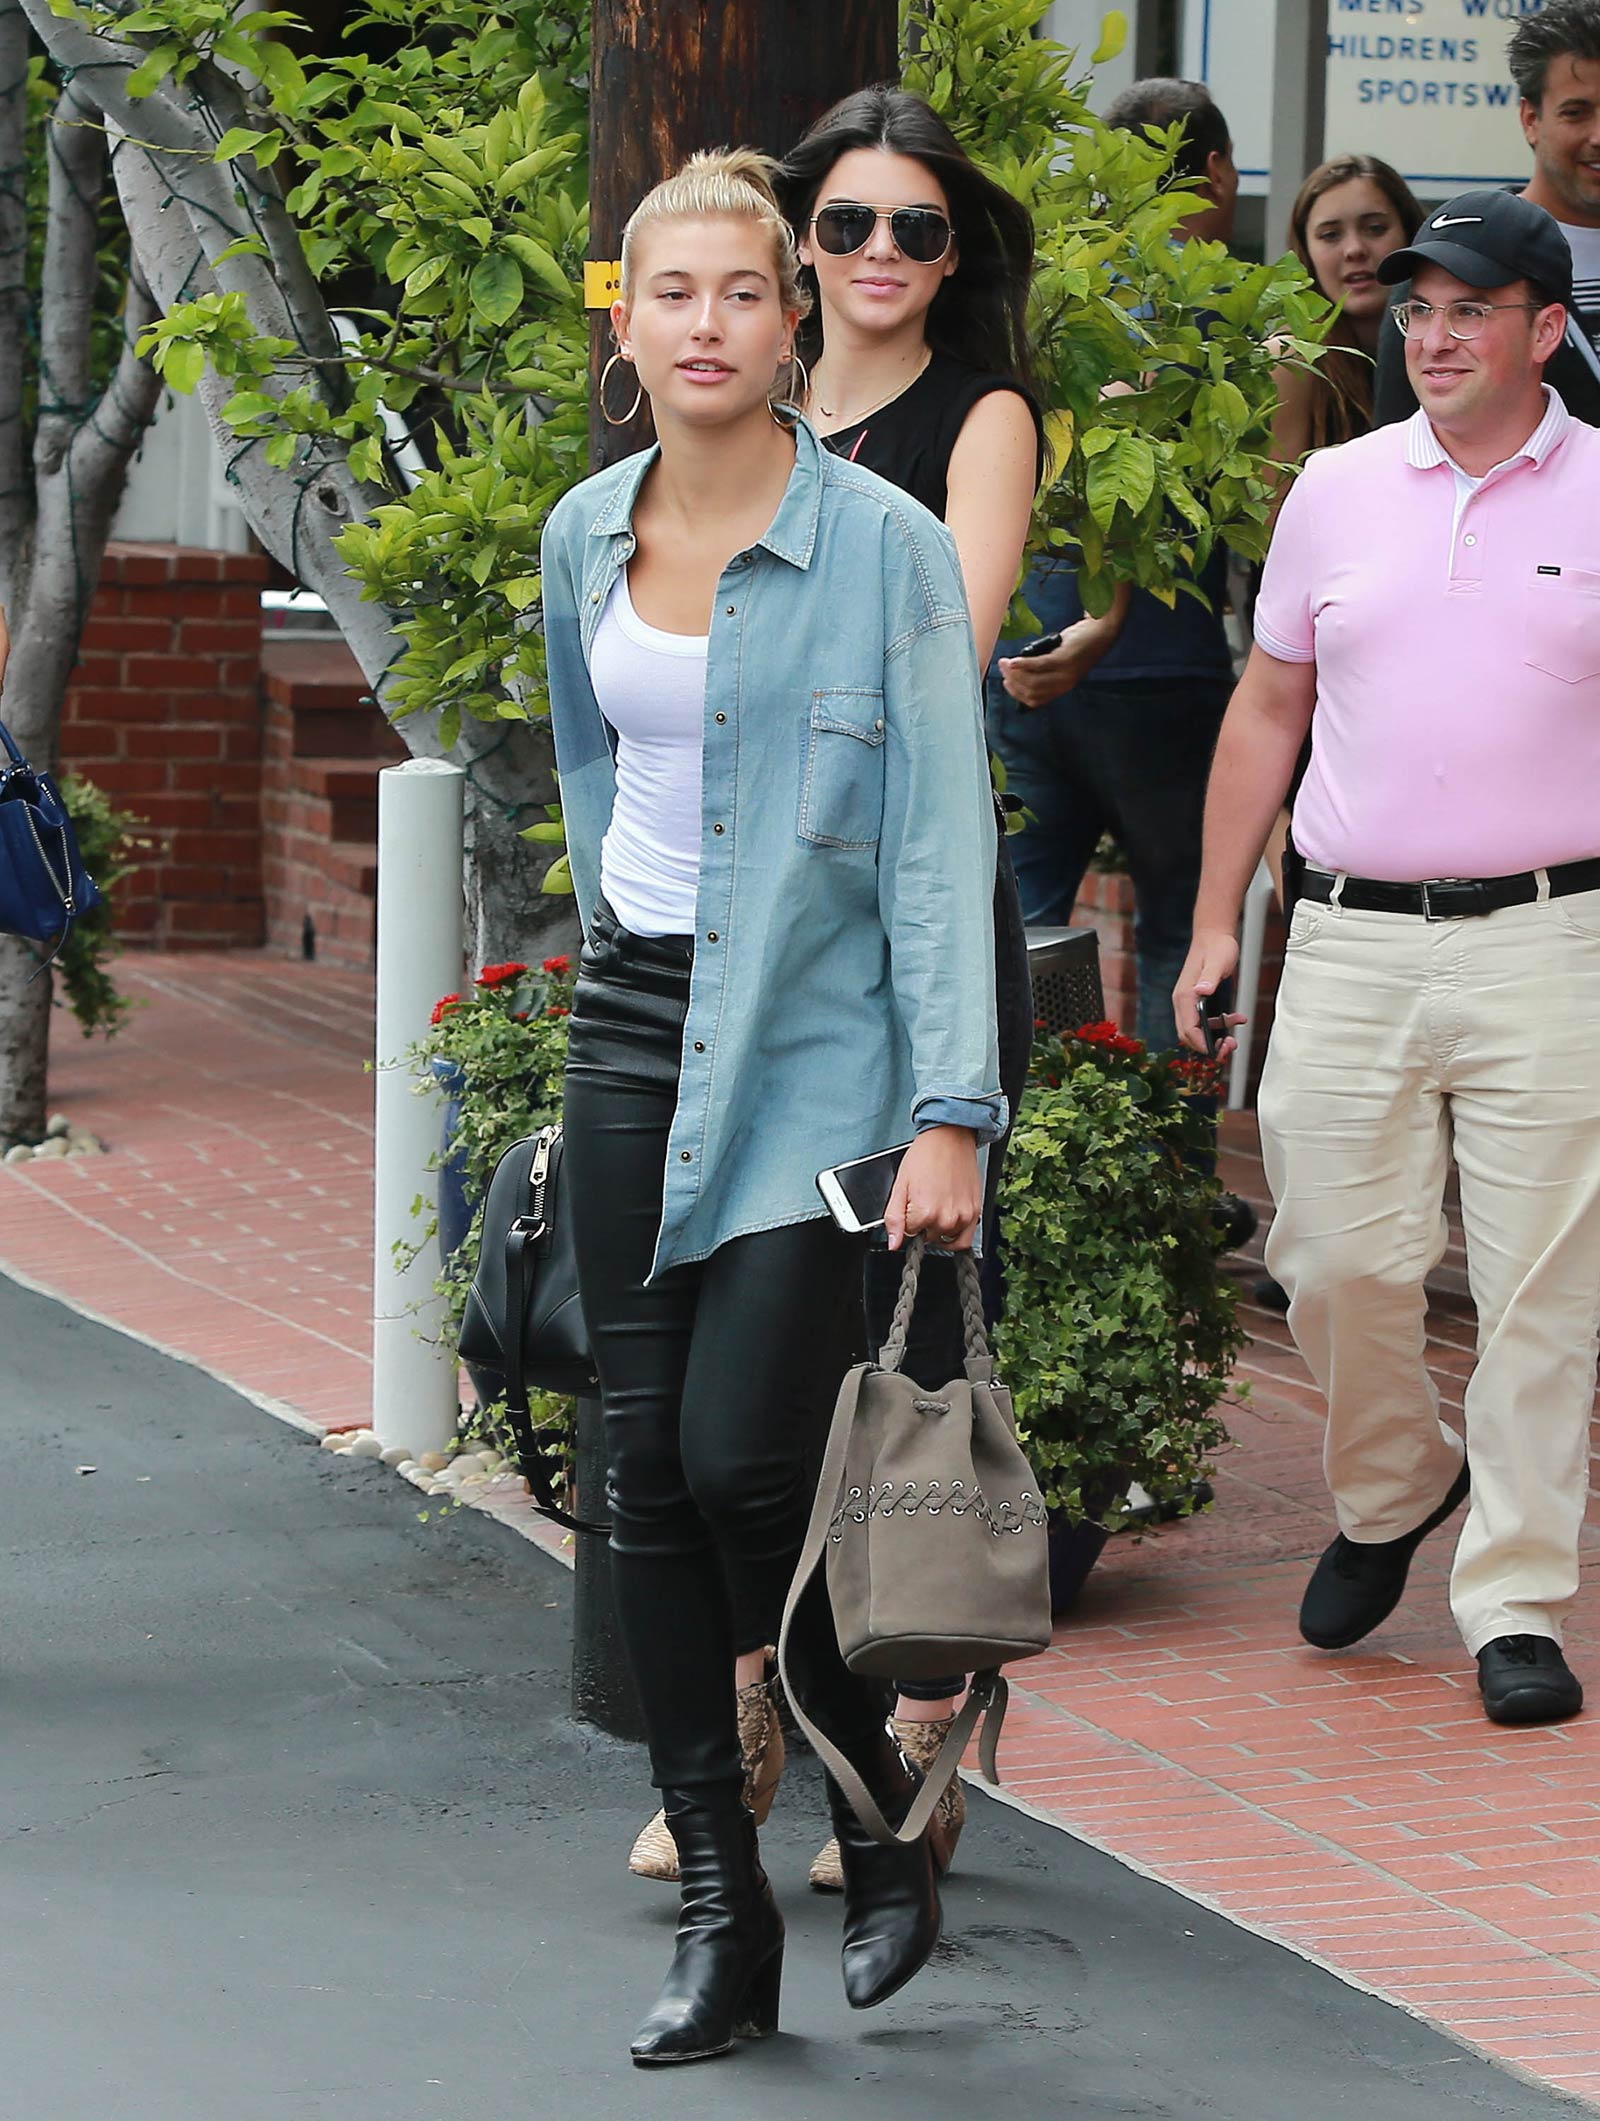 Hailey Baldwin at Fred Segal in West Hollywood